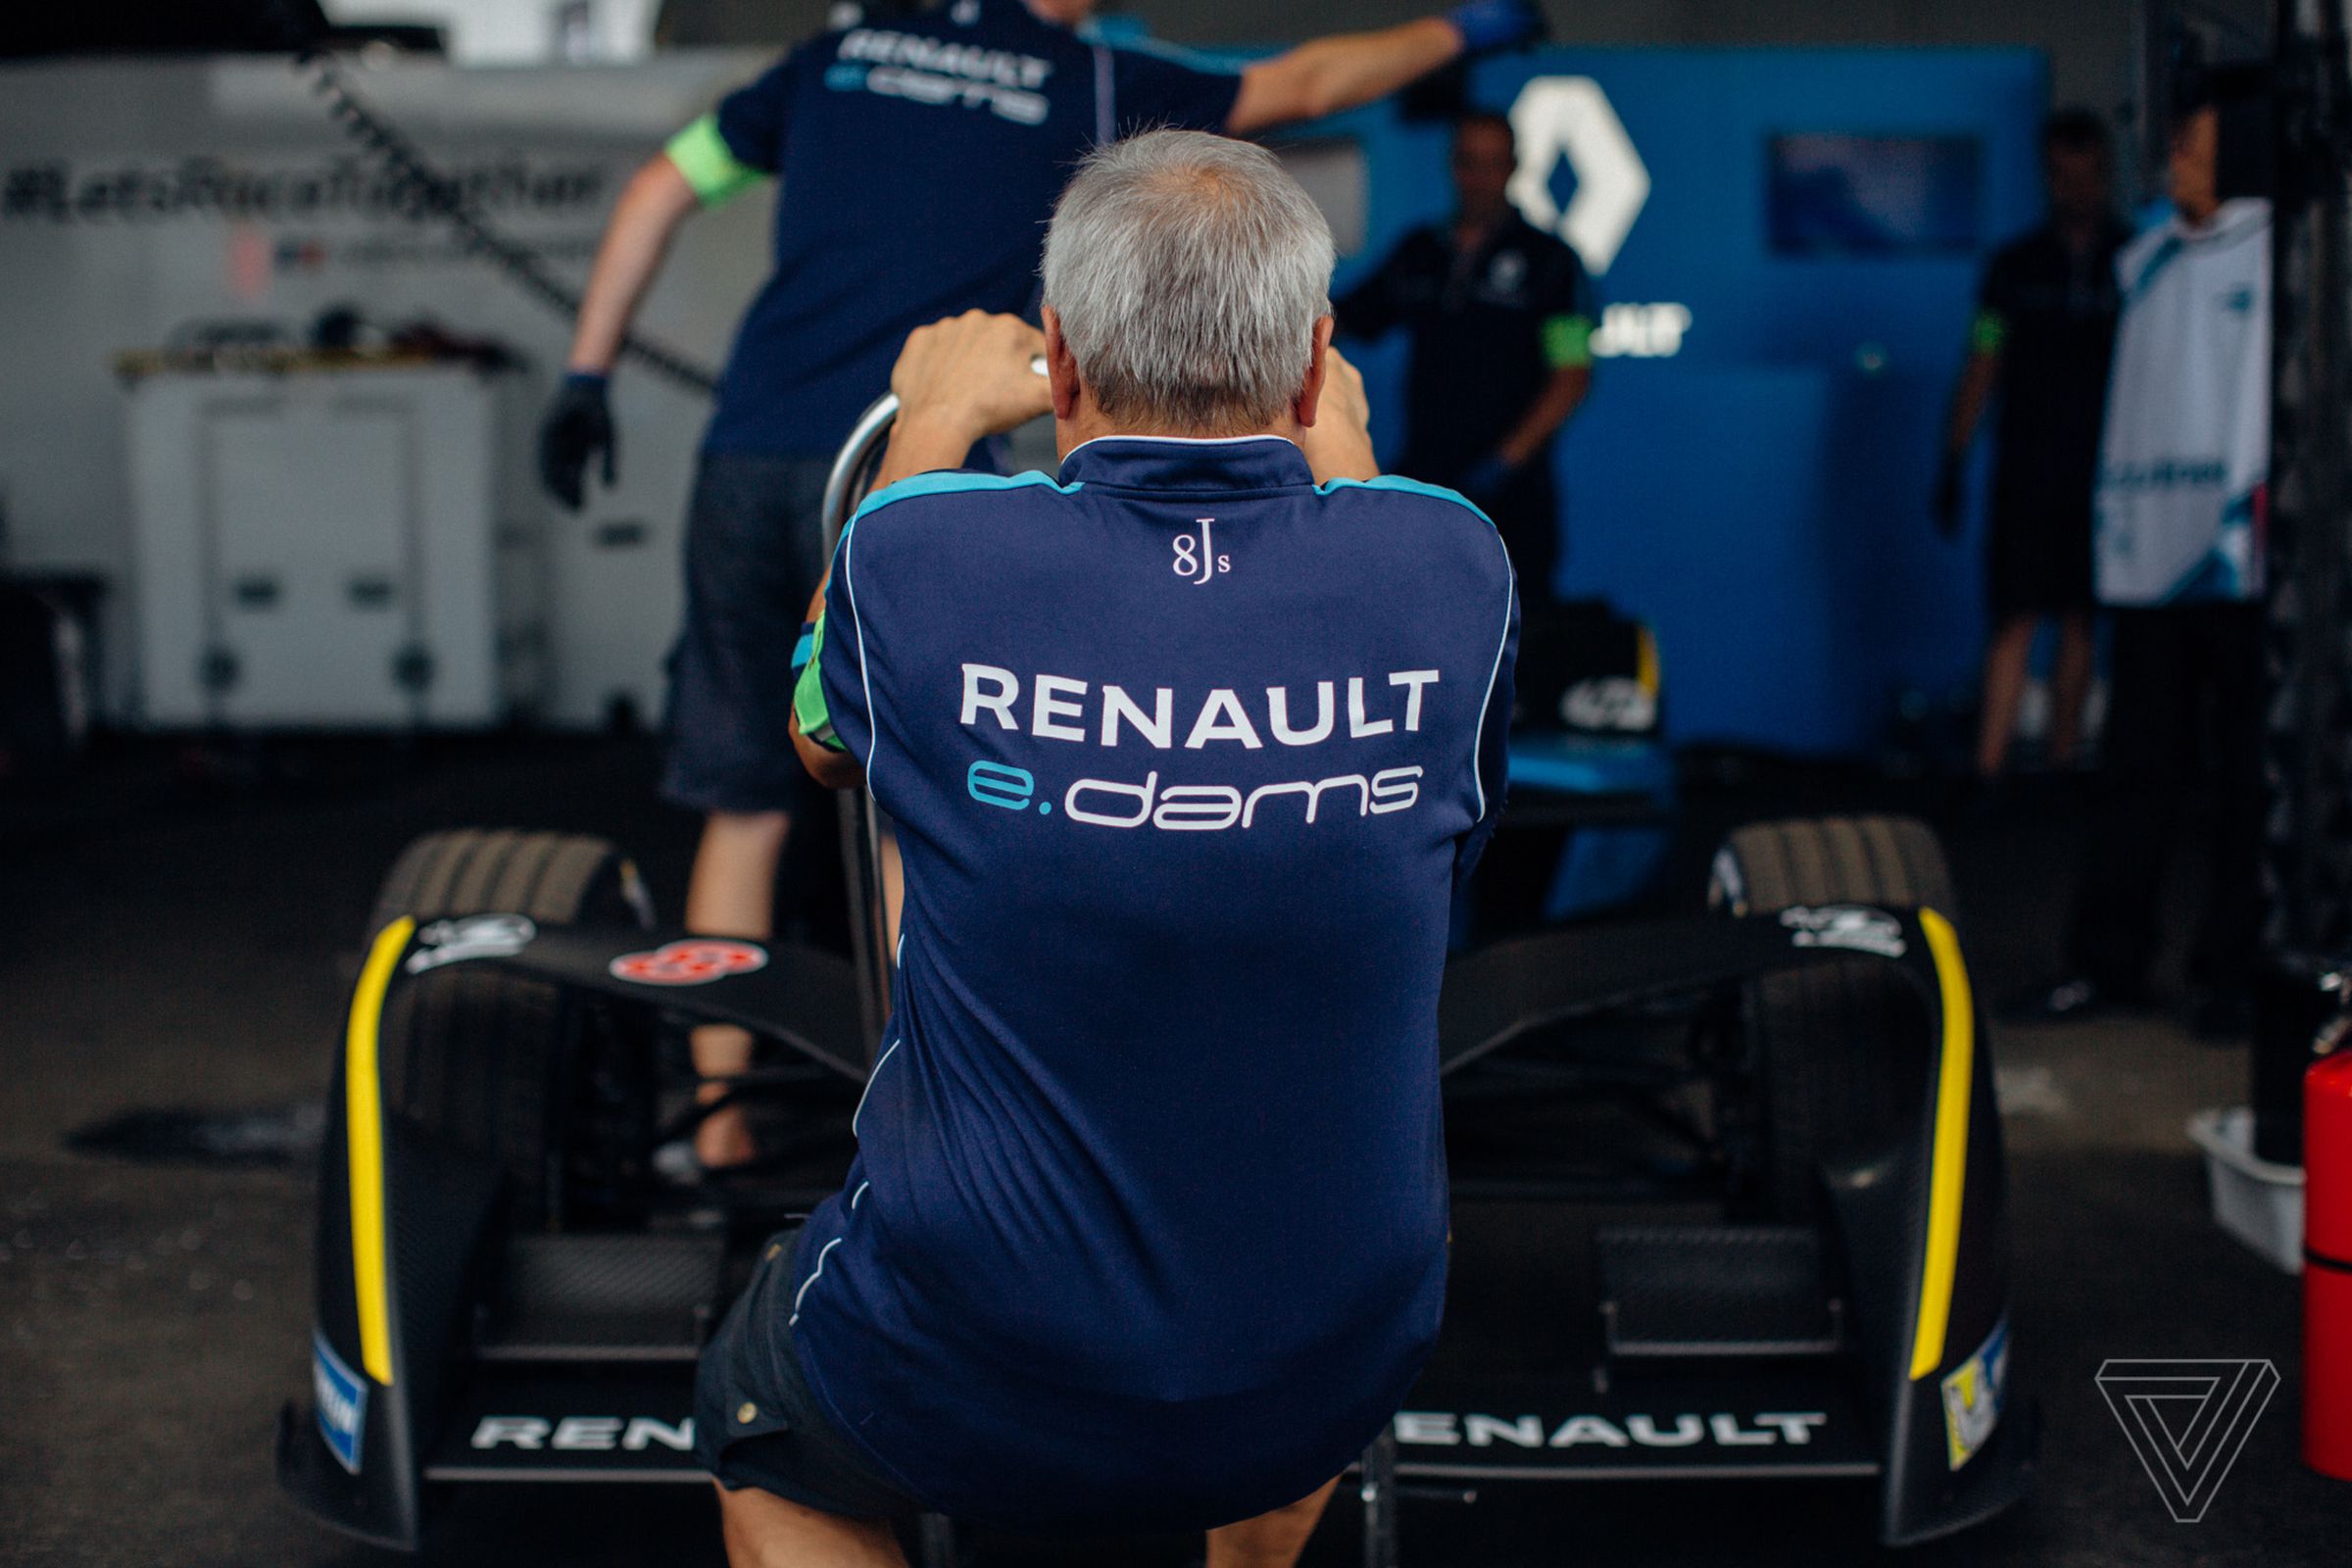 The Renault e.dams team jacks up the #8 car of driver Nico Prost. Renault far and away has the best chance of winning the team championship this season.